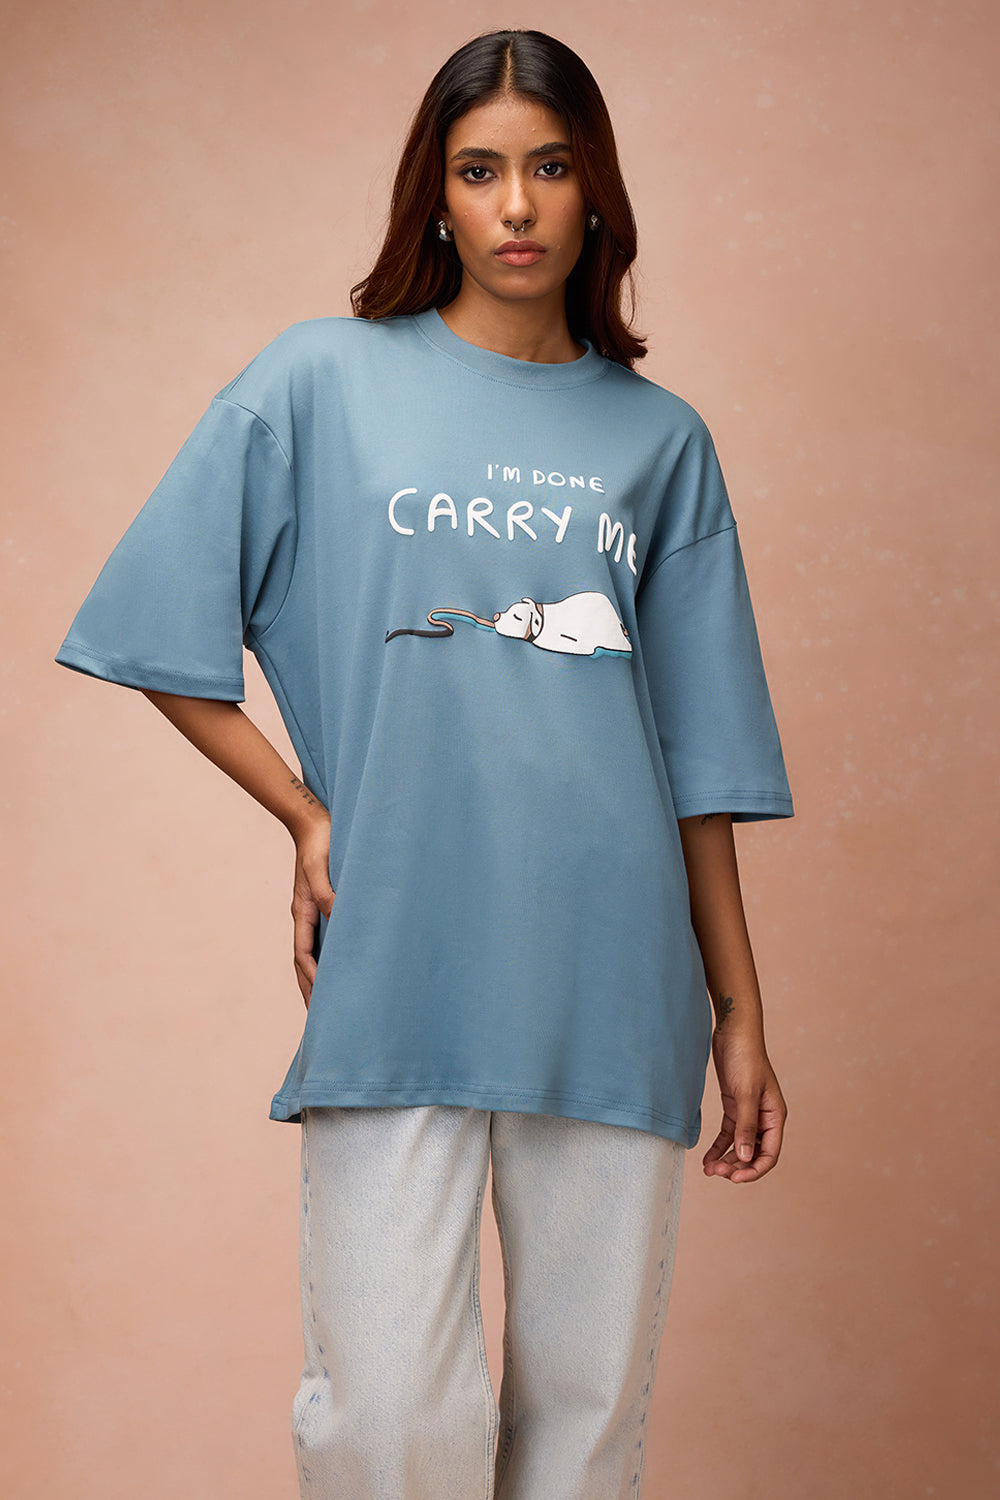 Women's Done Please Carry Me T-Shirt